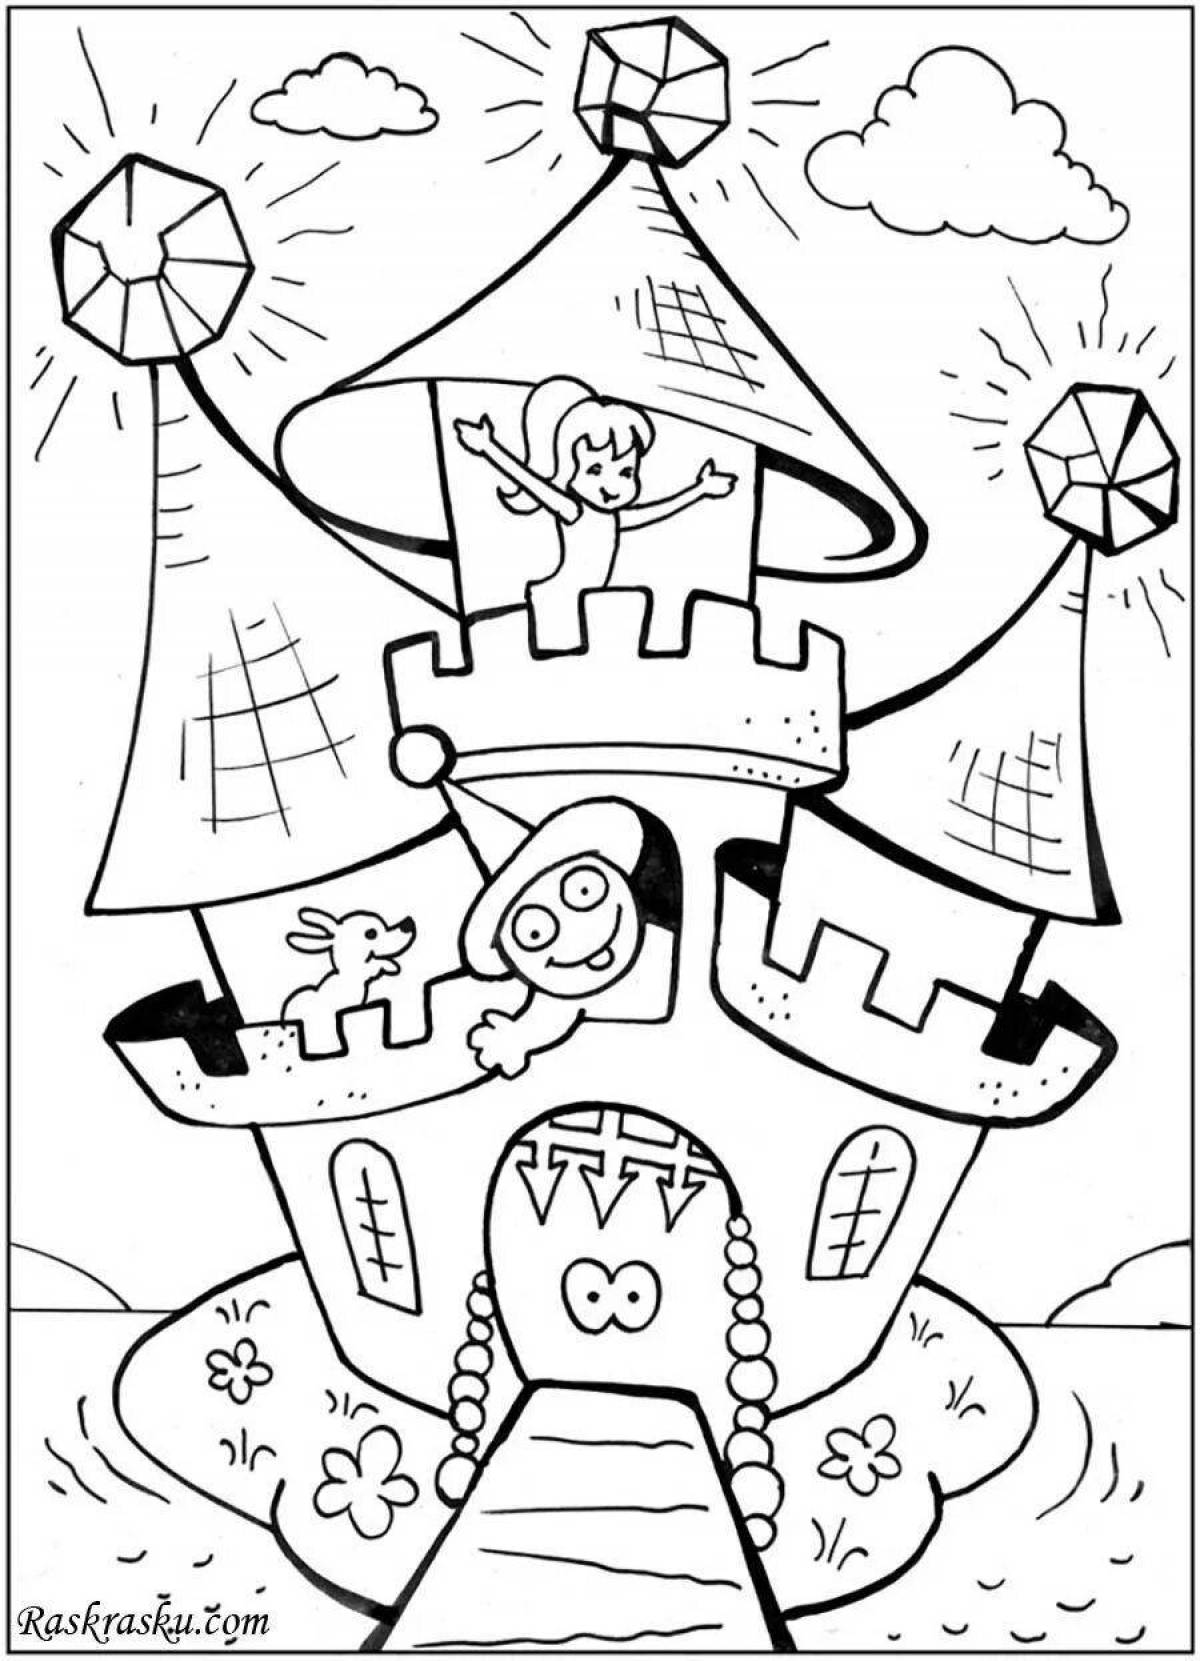 Glitter coloring pages for girls with houses and castles